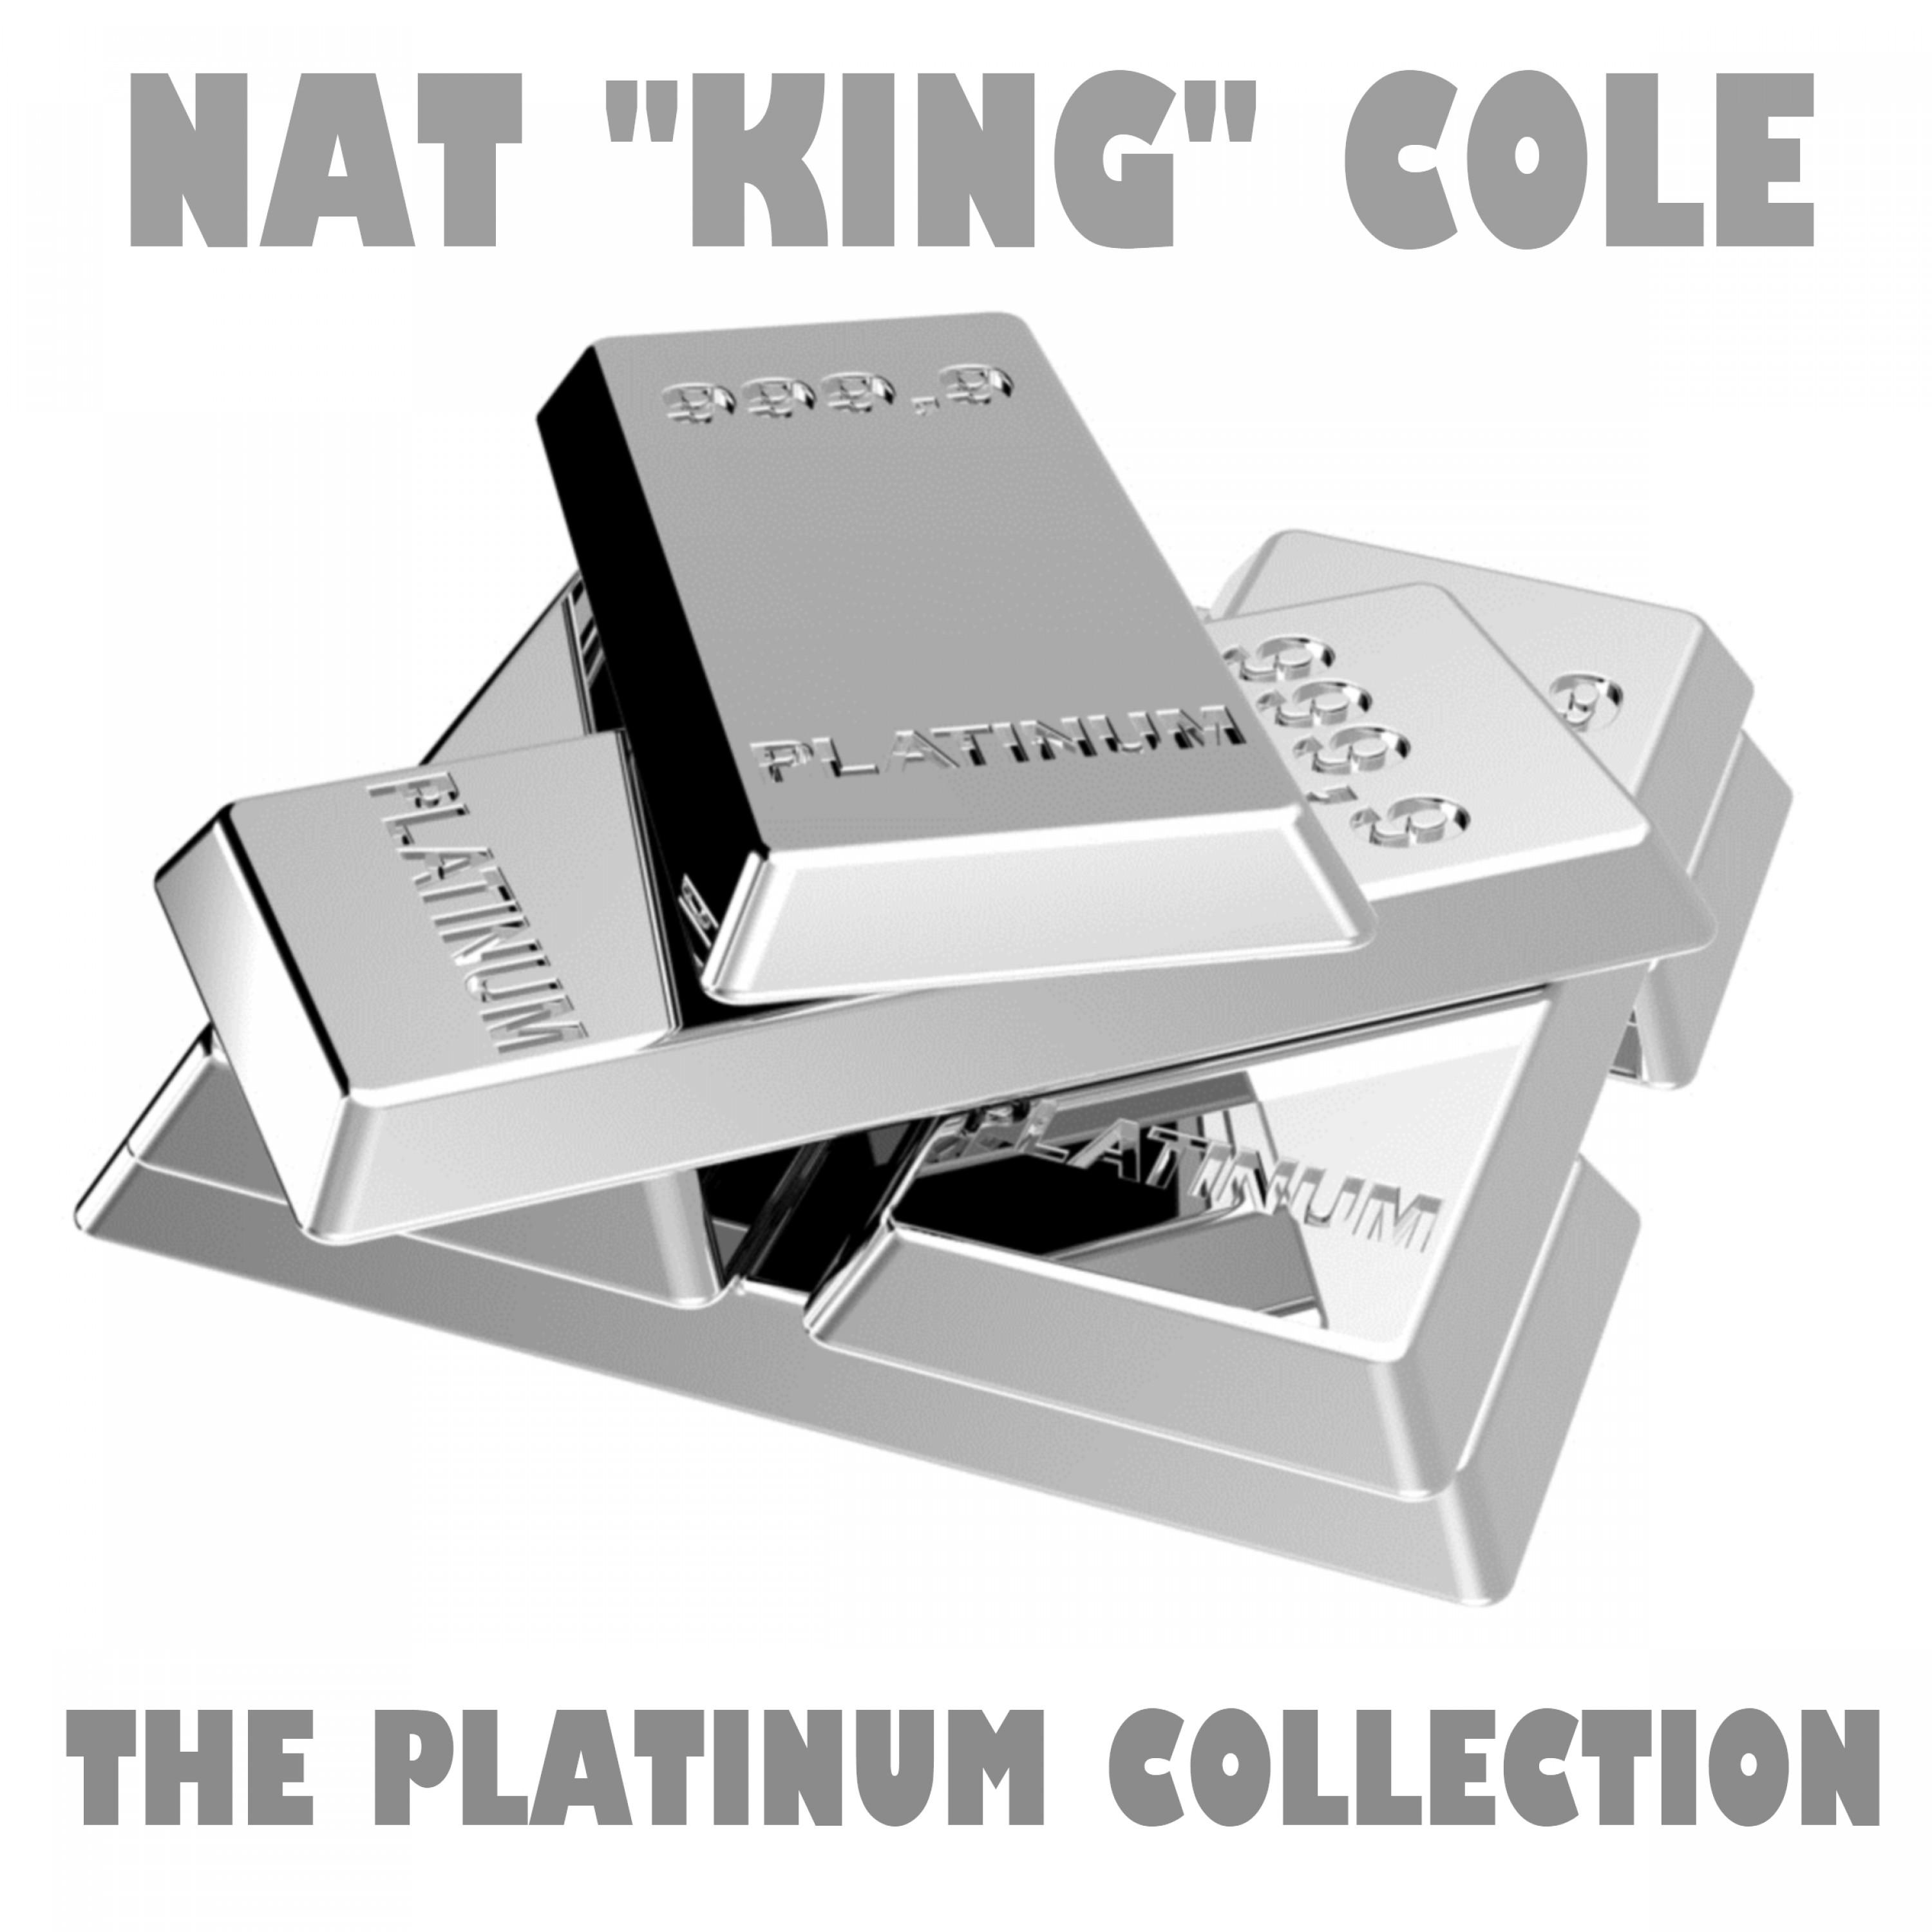 The Platinum Collection: Nat "King" Cole